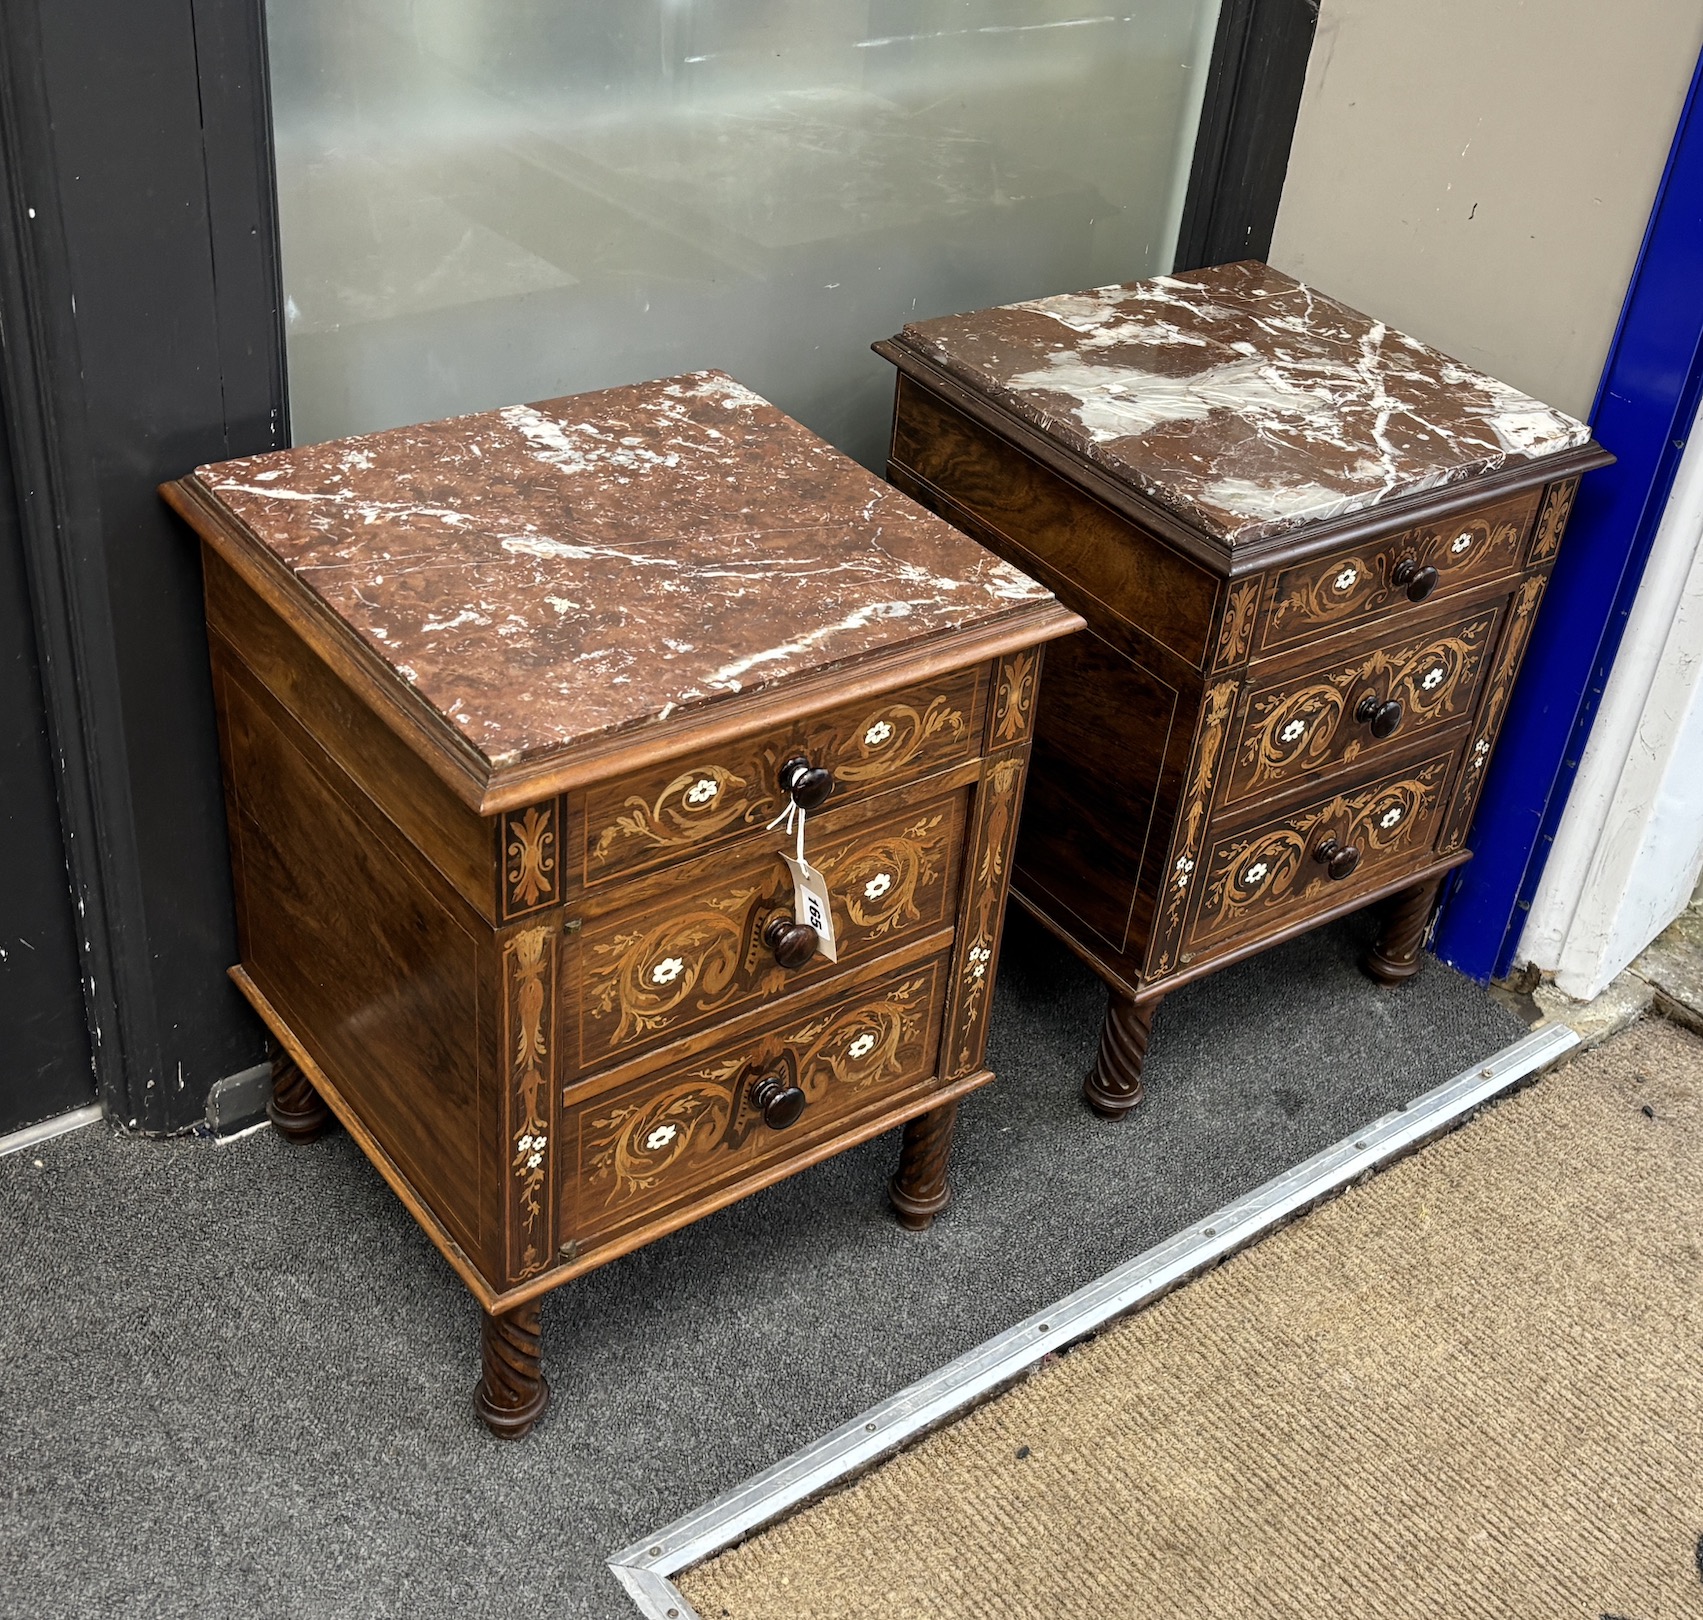 A pair of late 19th century French marquetry inlaid rosewood three drawer marble topped bedside chests, width 39cm, depth 38cm, height 53cm